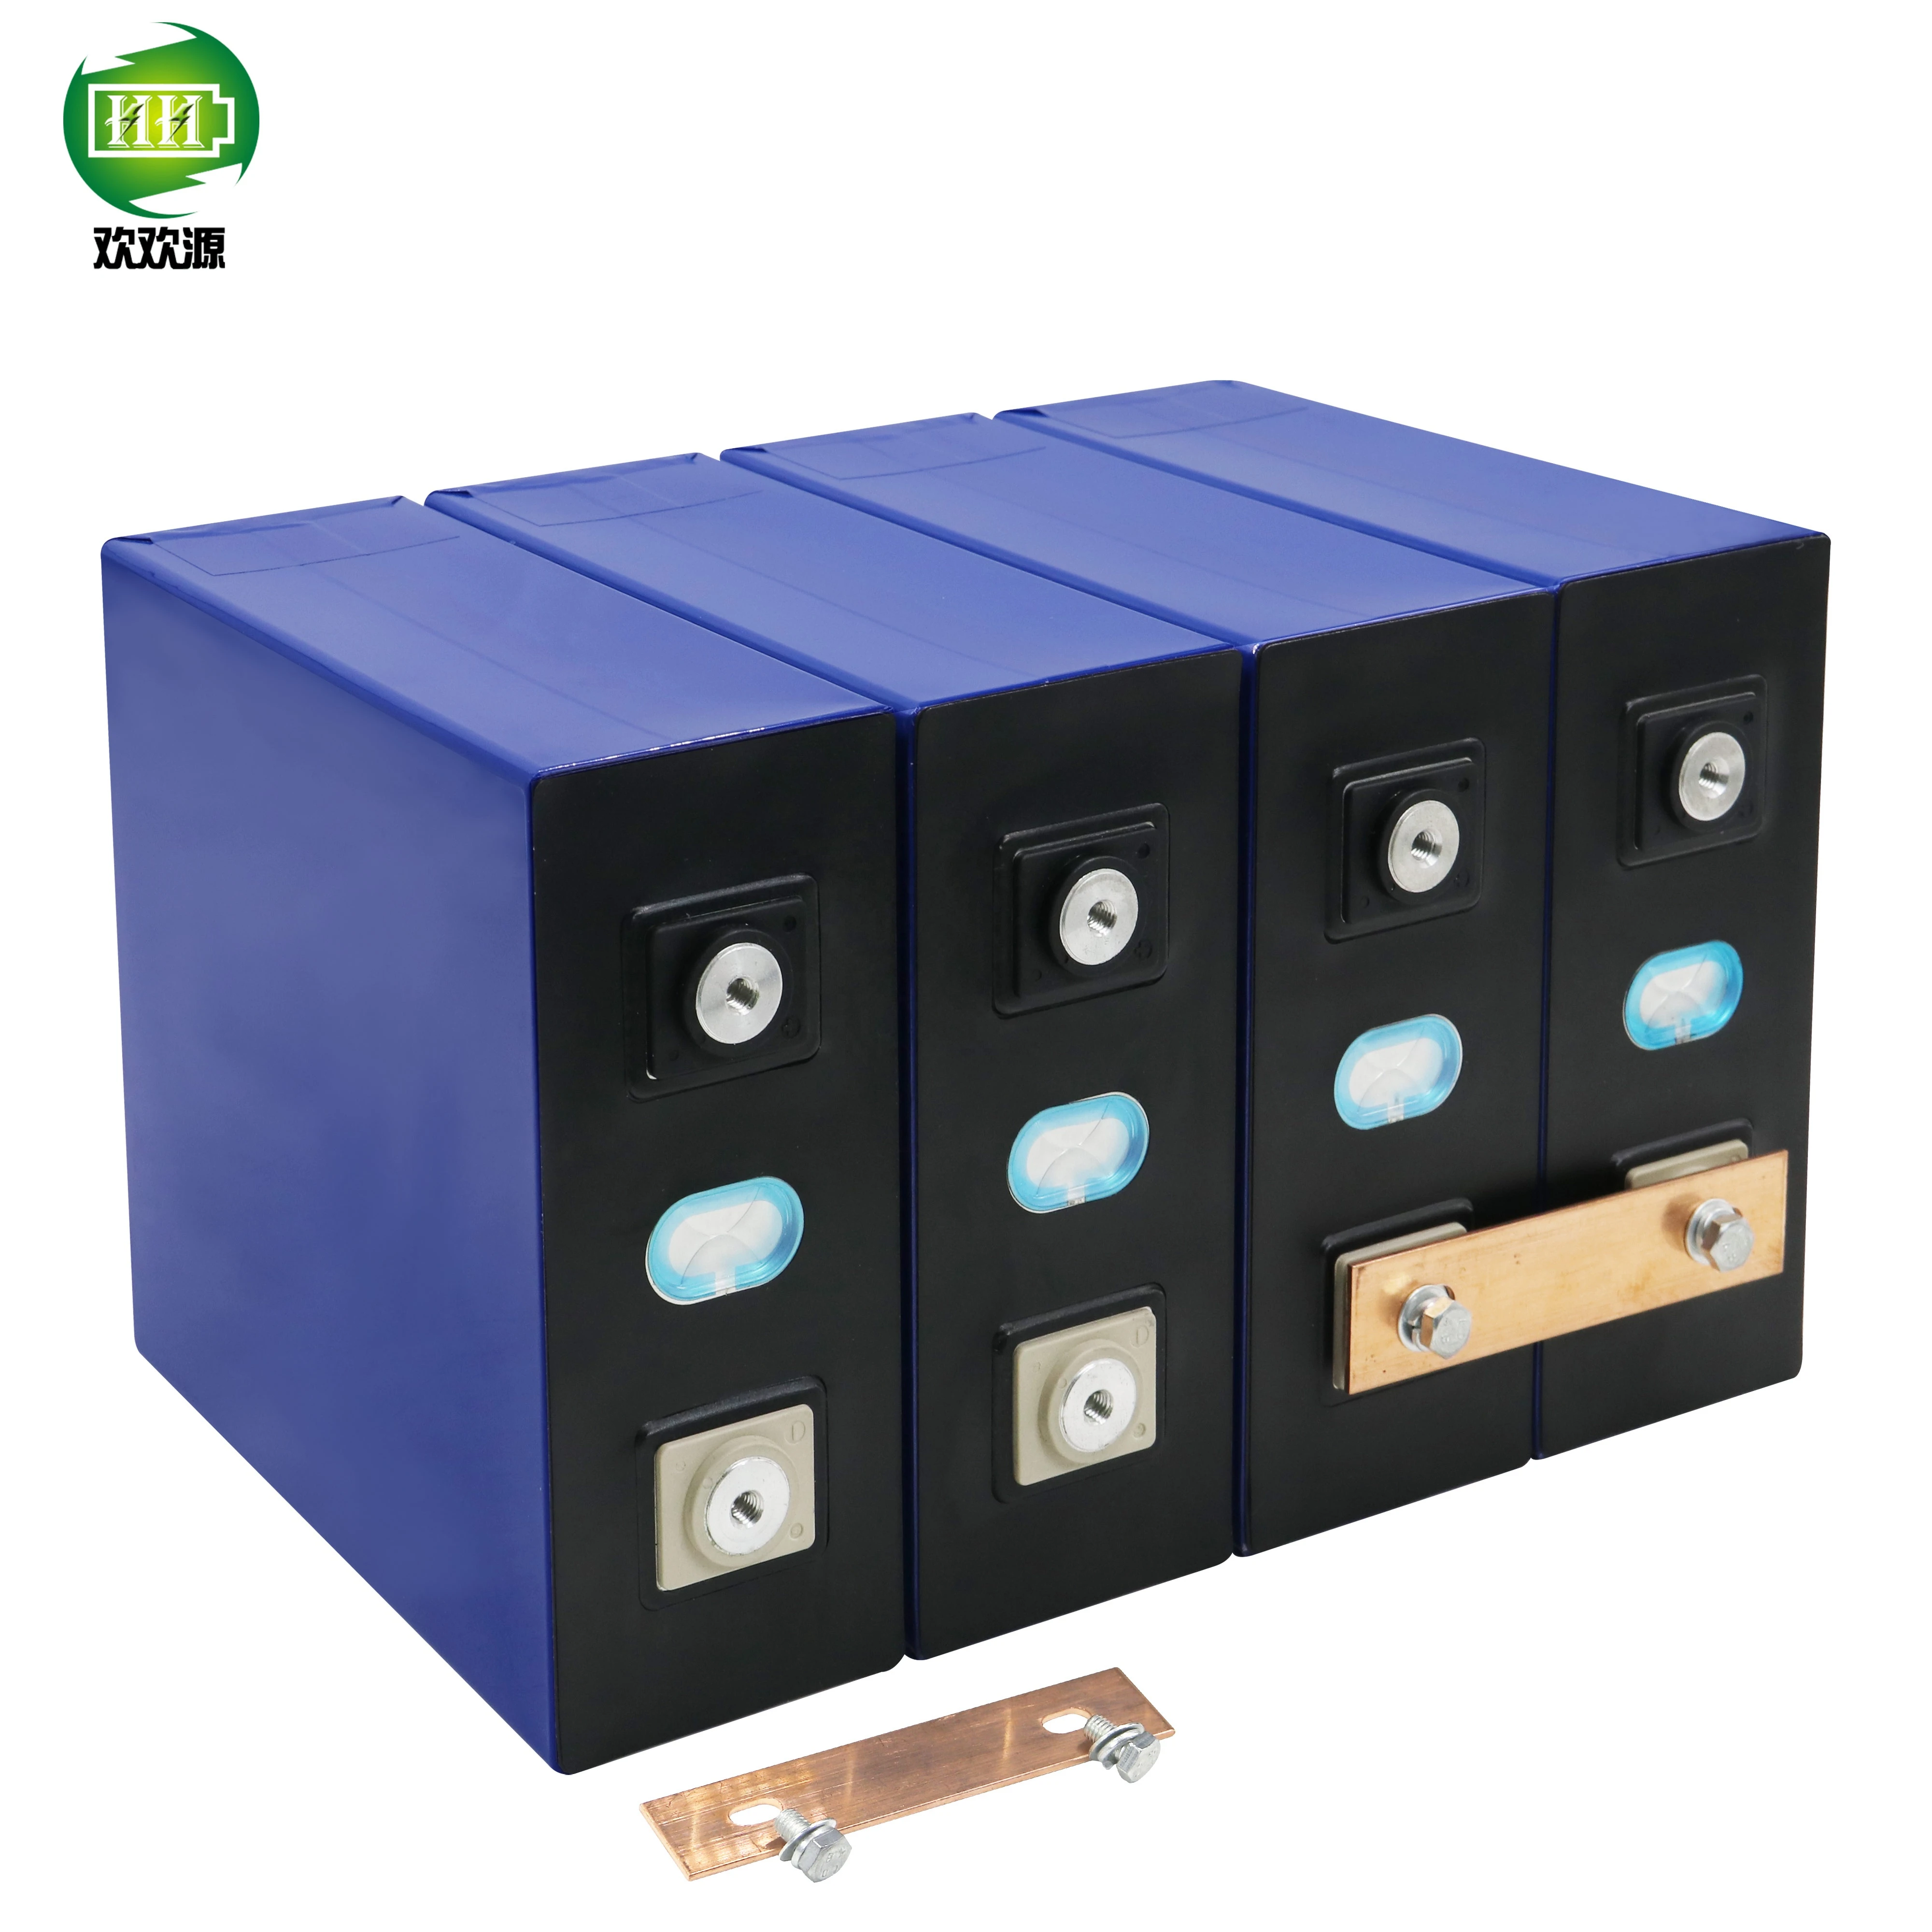 Specializing in Manufacturing Solar Energy Storage Square Lithium Battery Toys Power Tools Electric Vehicles Home Appliances